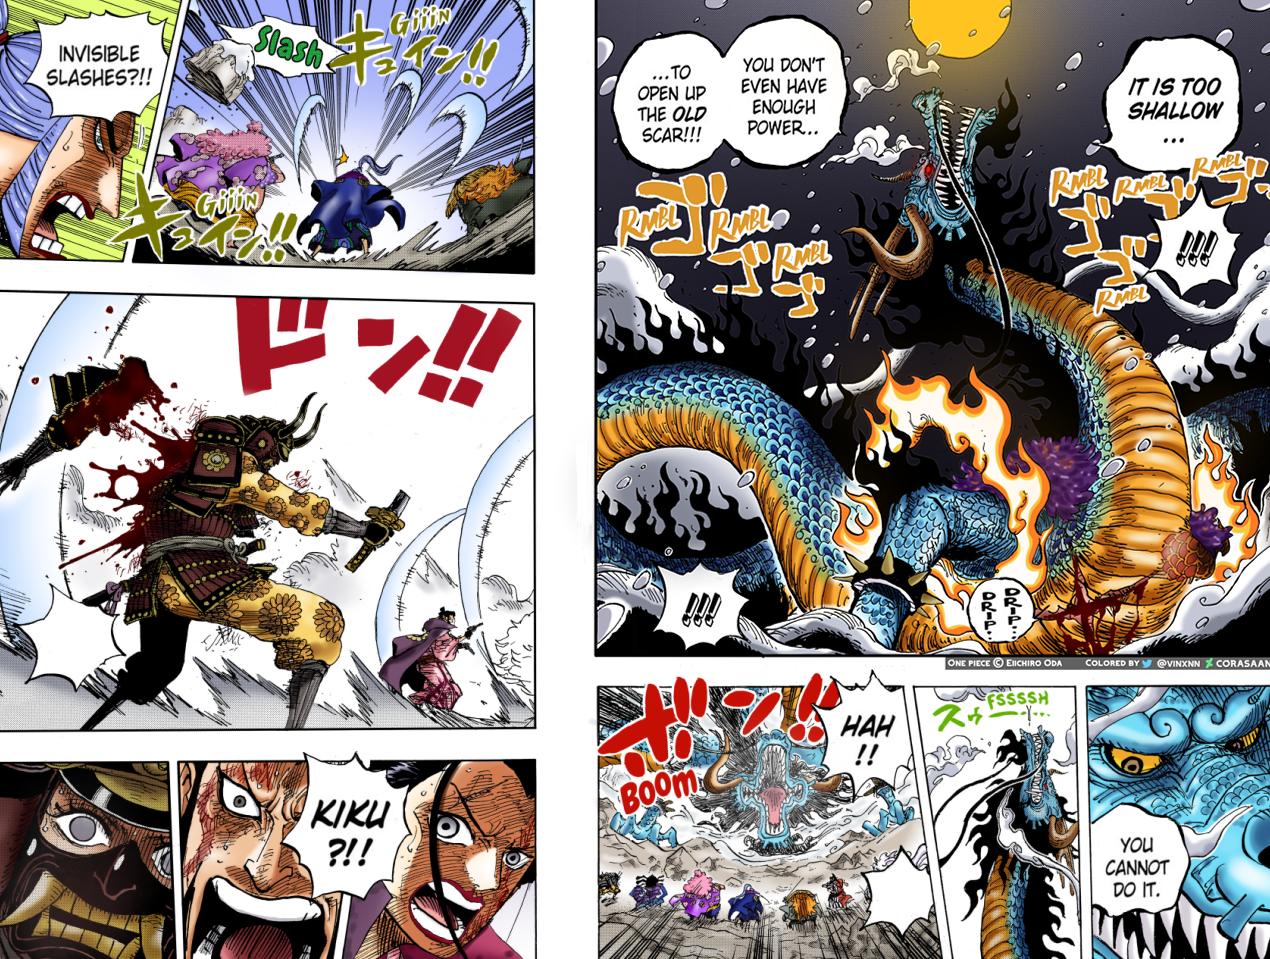 I Colored The Last Page One Piece 993 By Corasaan On Deviantart